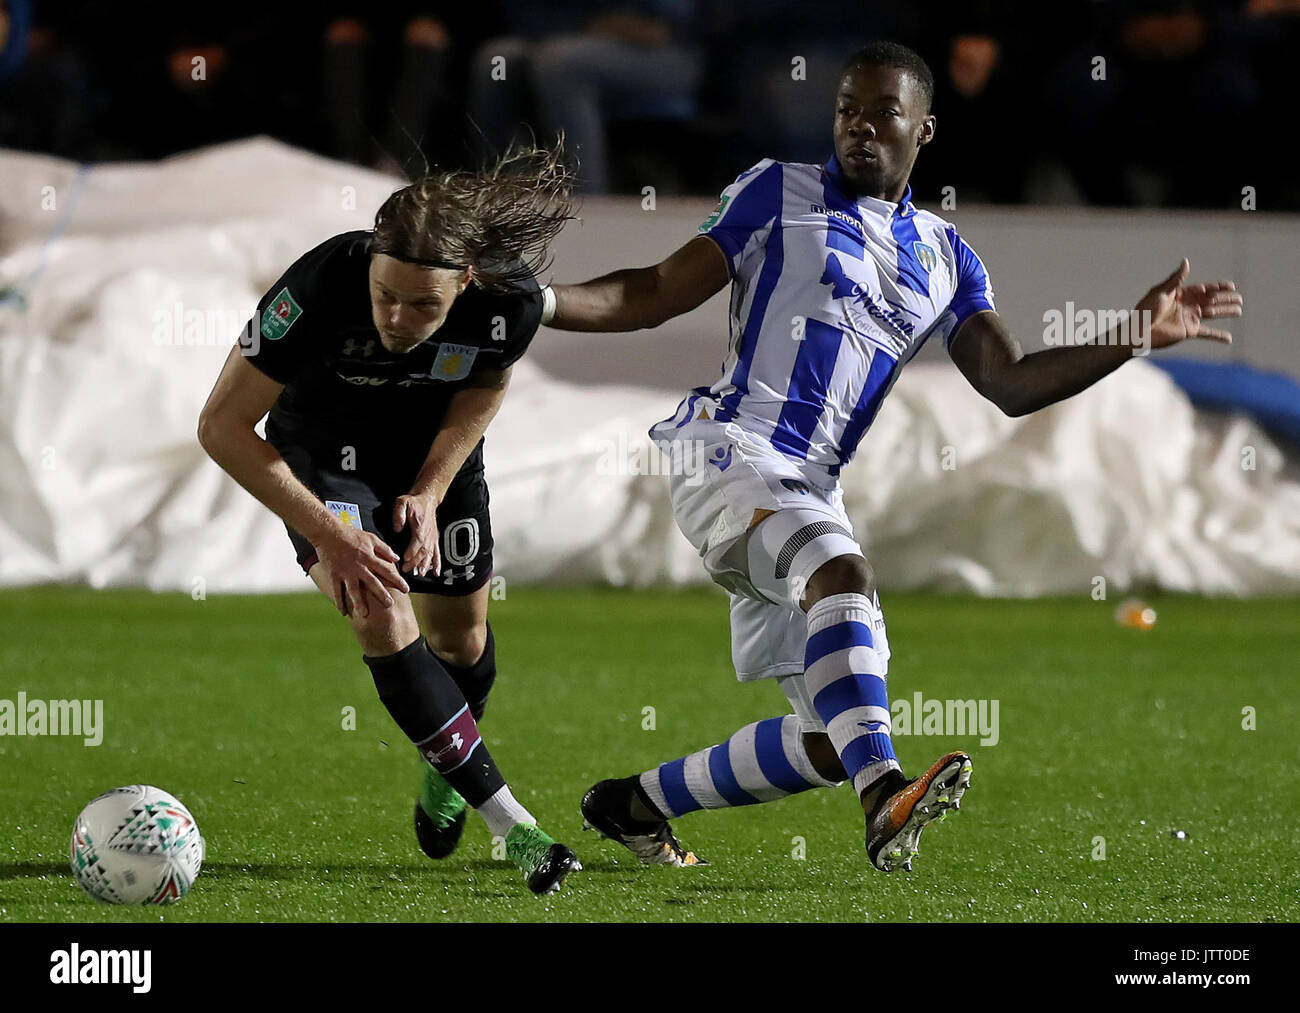 Aston Villa's Birkir Bjarnason (left) and Colchester United's Ryan Jackson battle for the ball during the Carabao Cup, First Round match at the Weston Homes Community Stadium, Colchester. Stock Photo